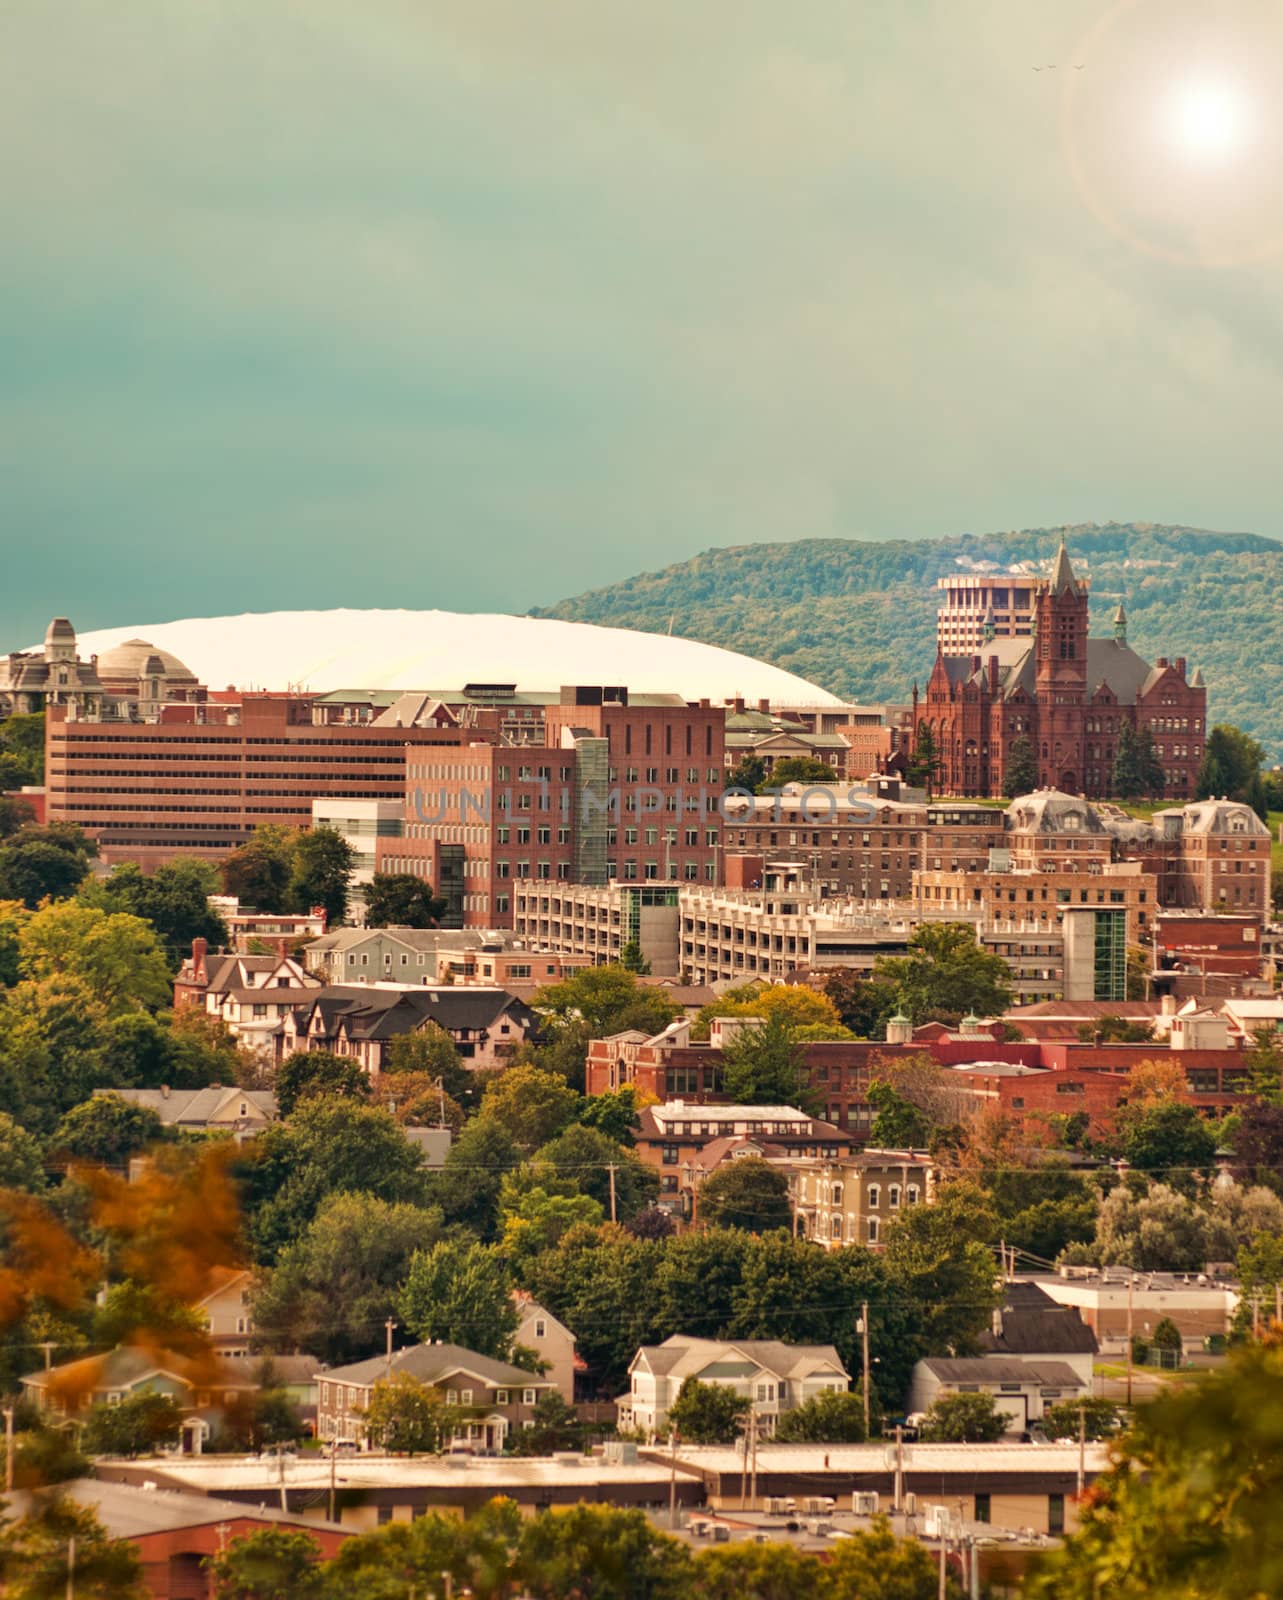 view of syracuse, new york , the carrier dome and syracuse university hill, vertical format